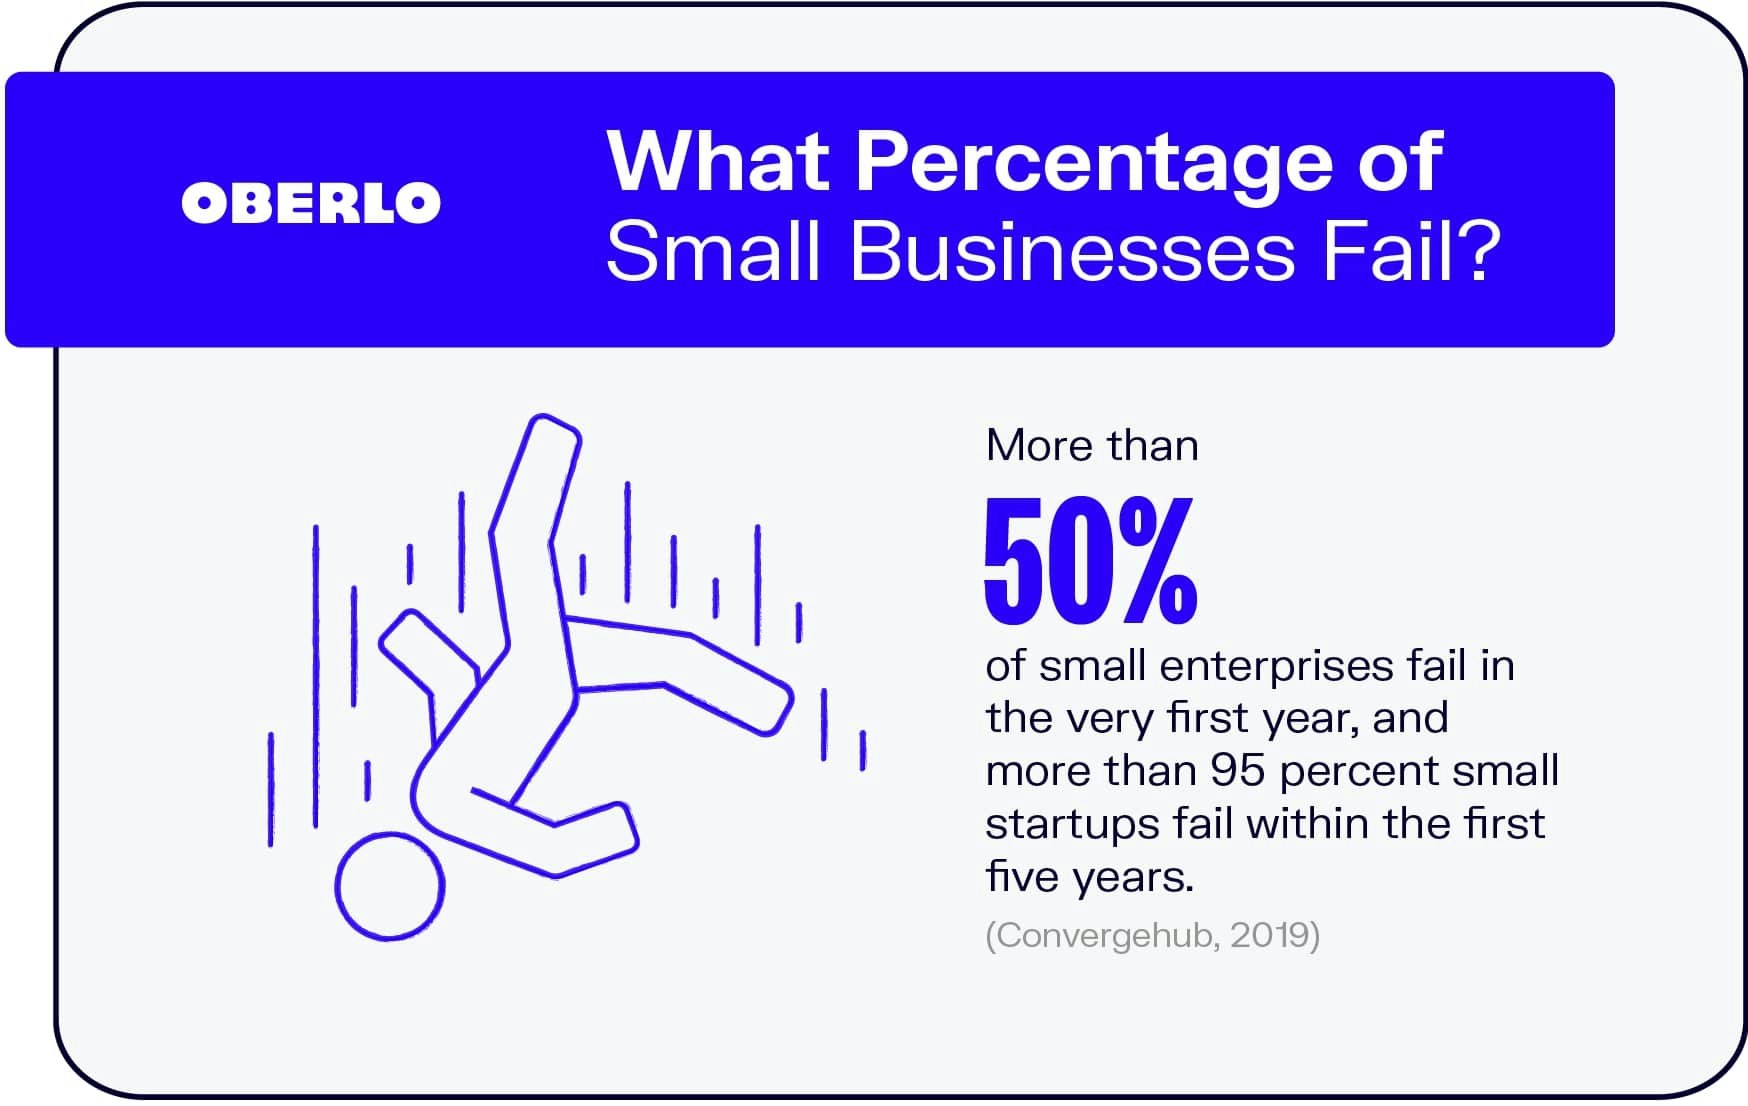 What Percentage of Small Businesses Fail?